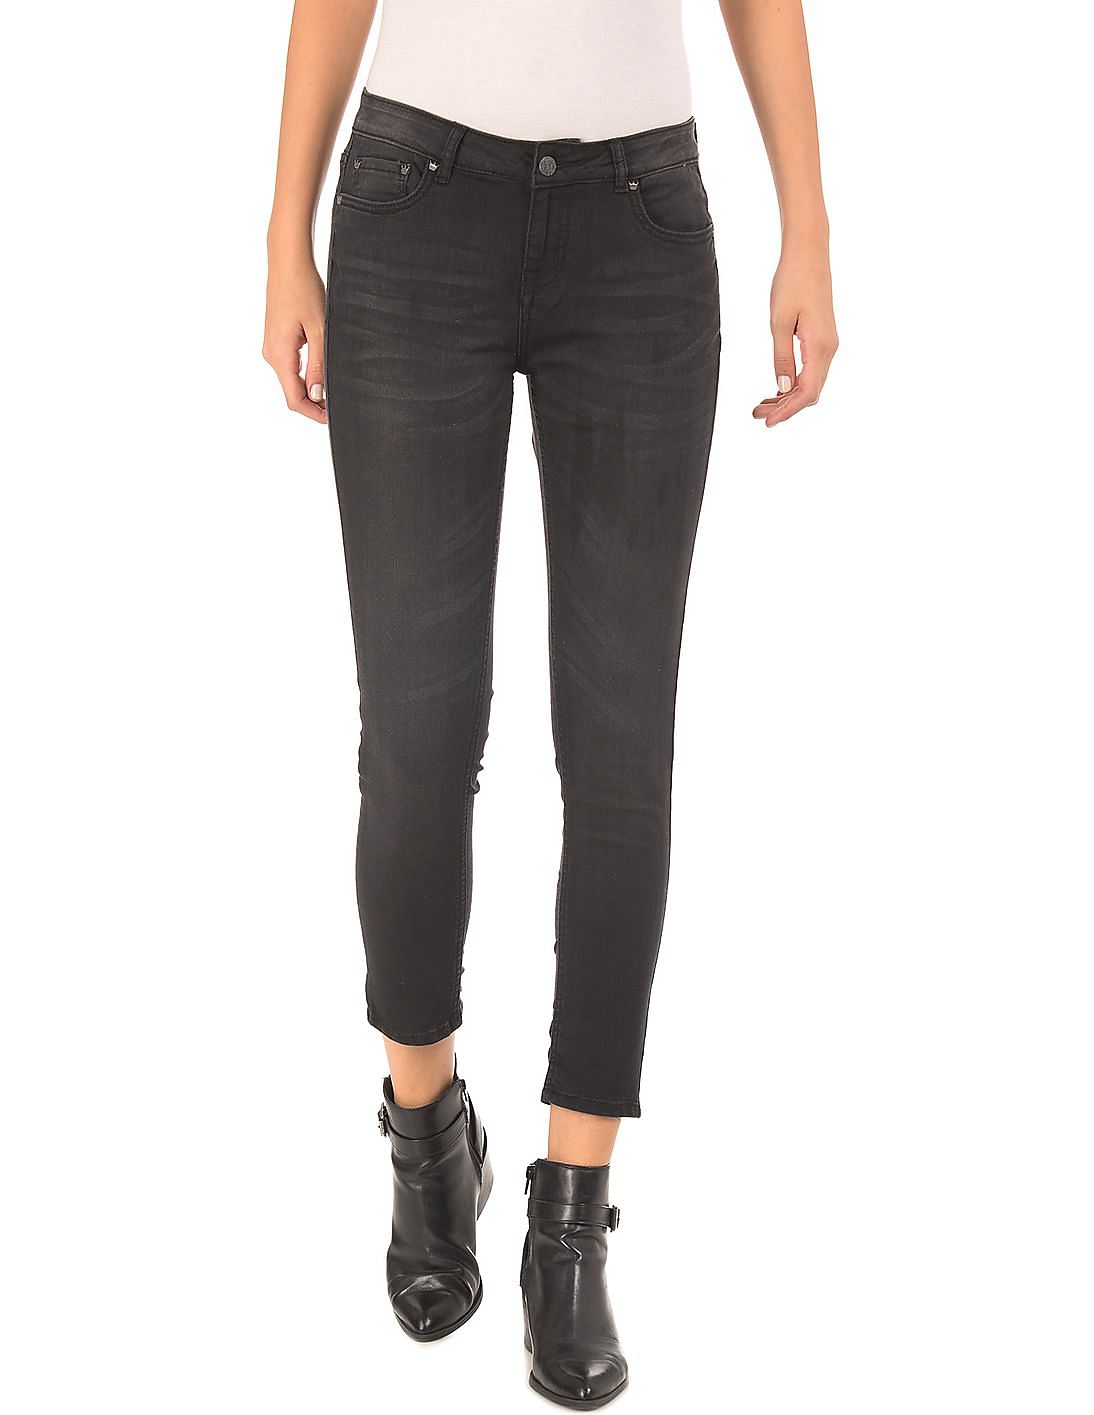 70% Off on Women’s Jeans Starts from Rs. 240